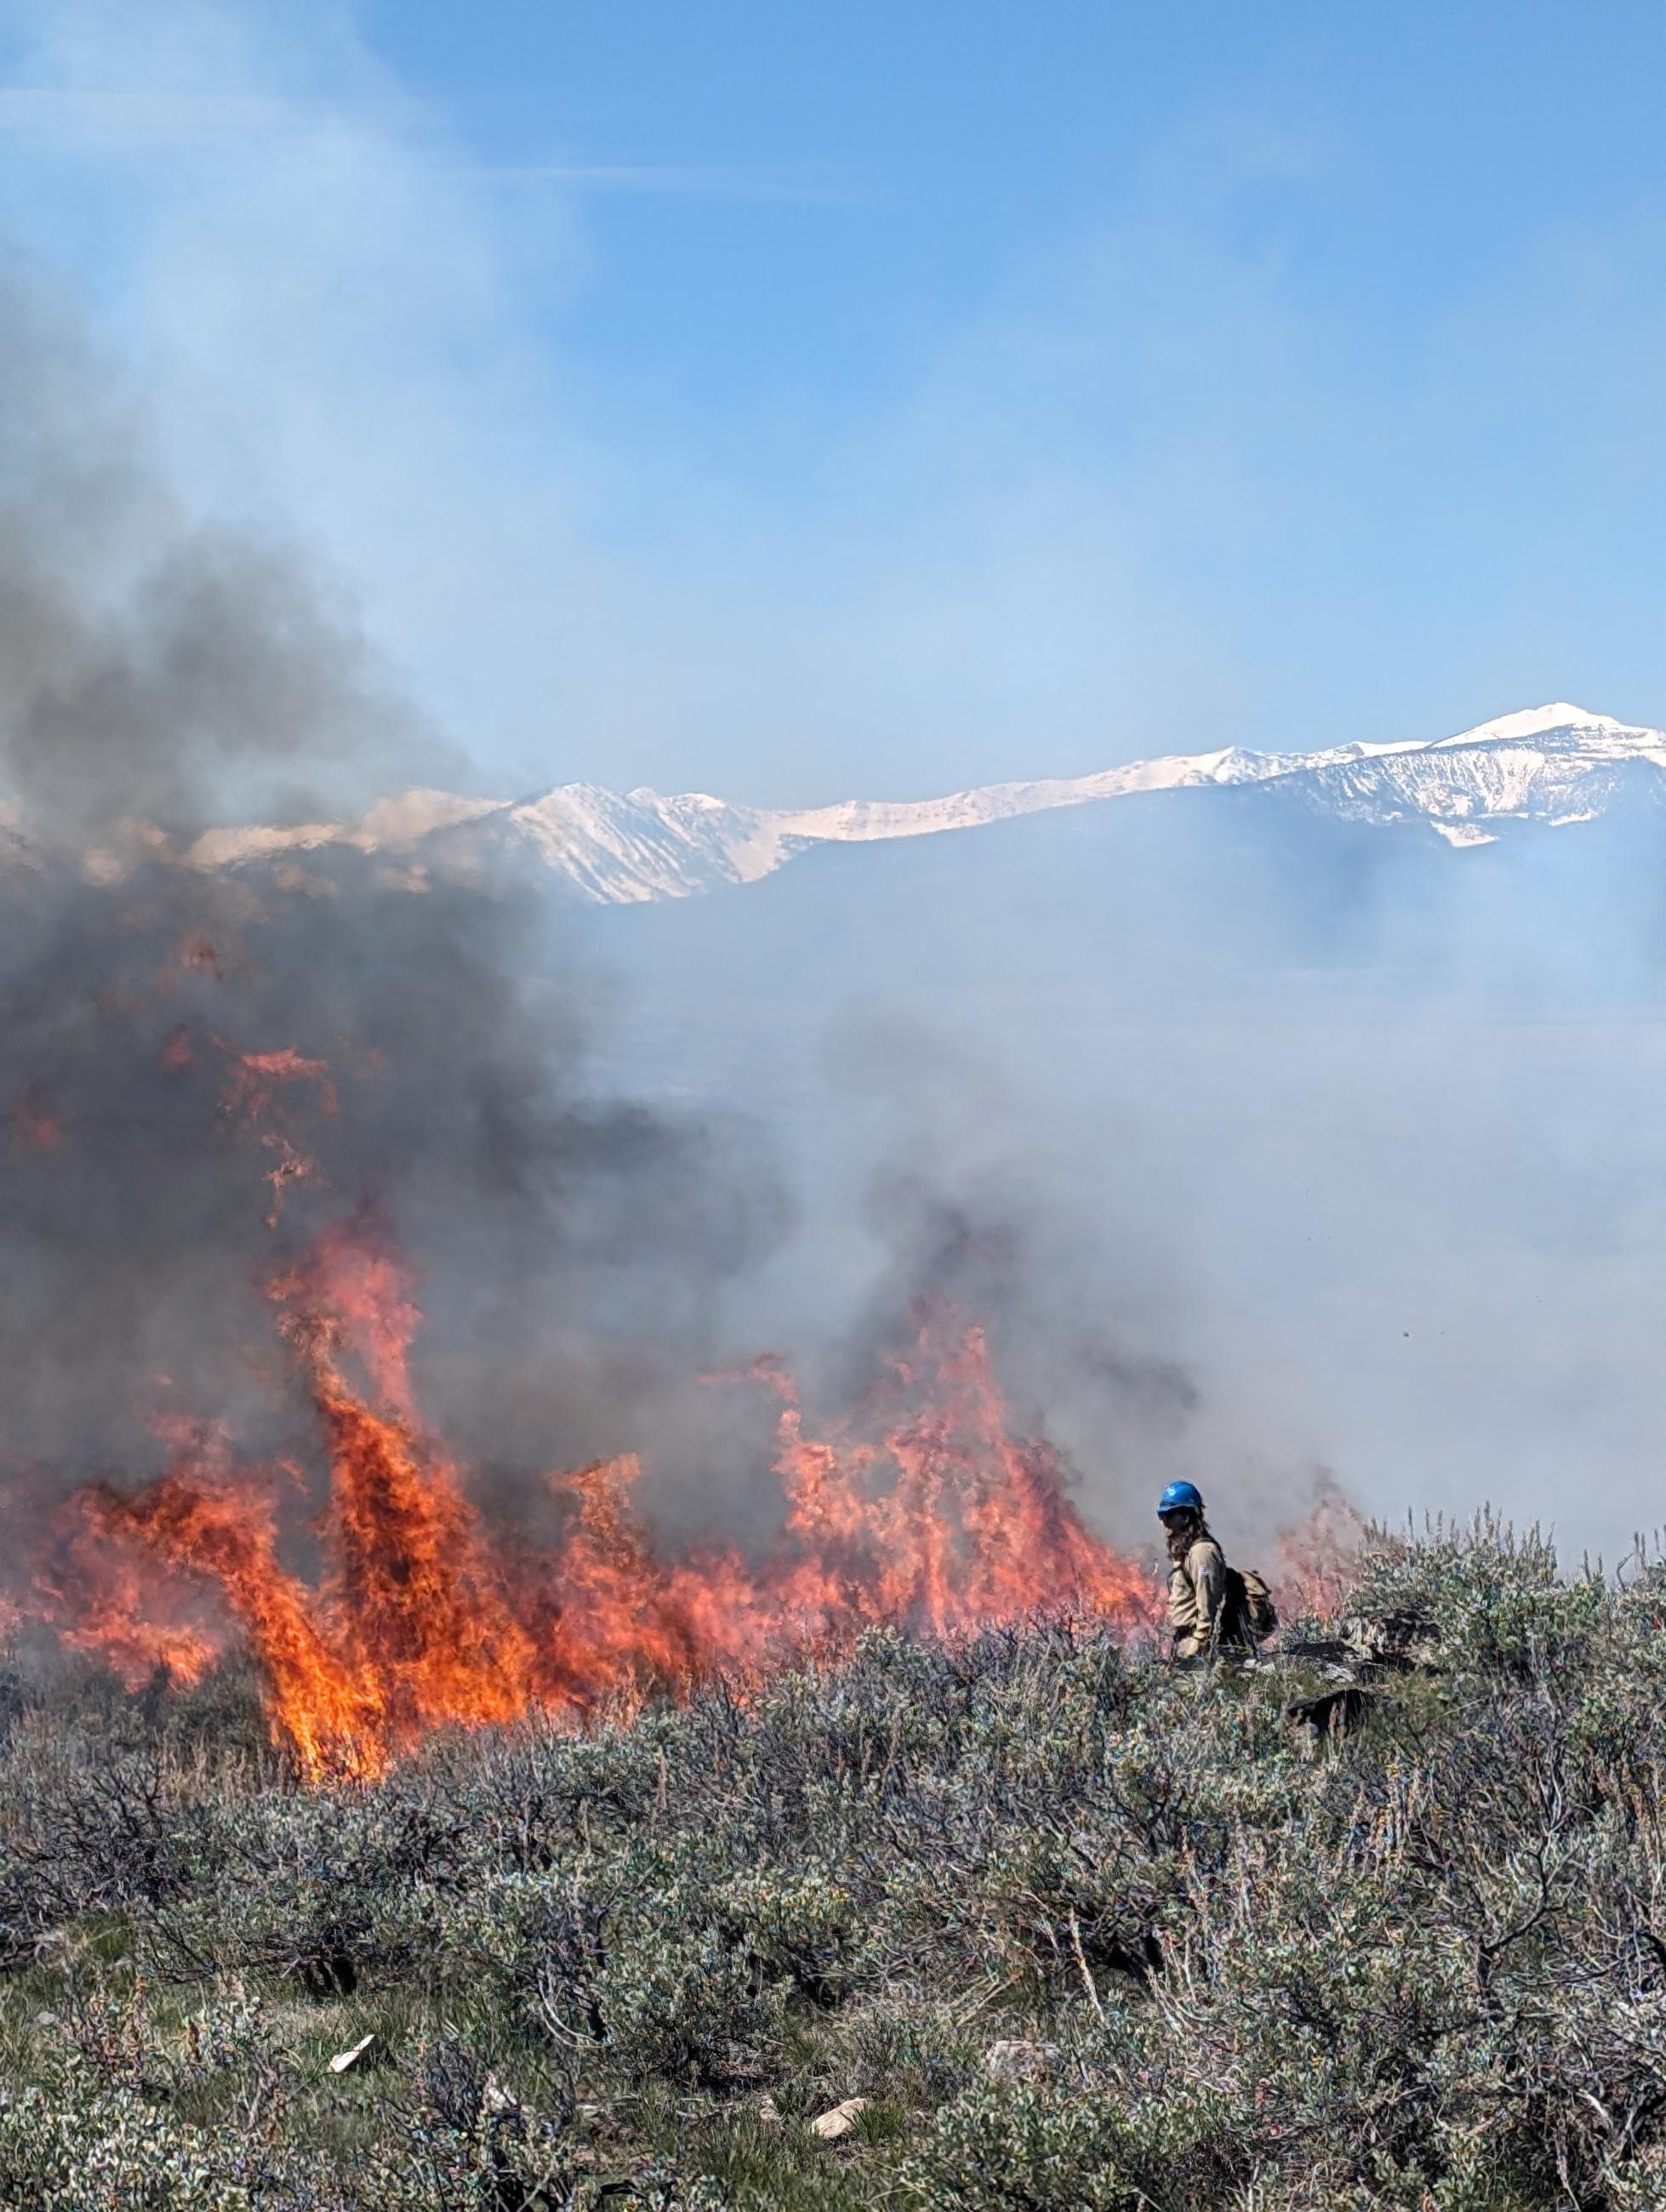 A firefighter monitors flames in the sagebrush on a prescribed fire operation, with snow-capped mountains in the background.